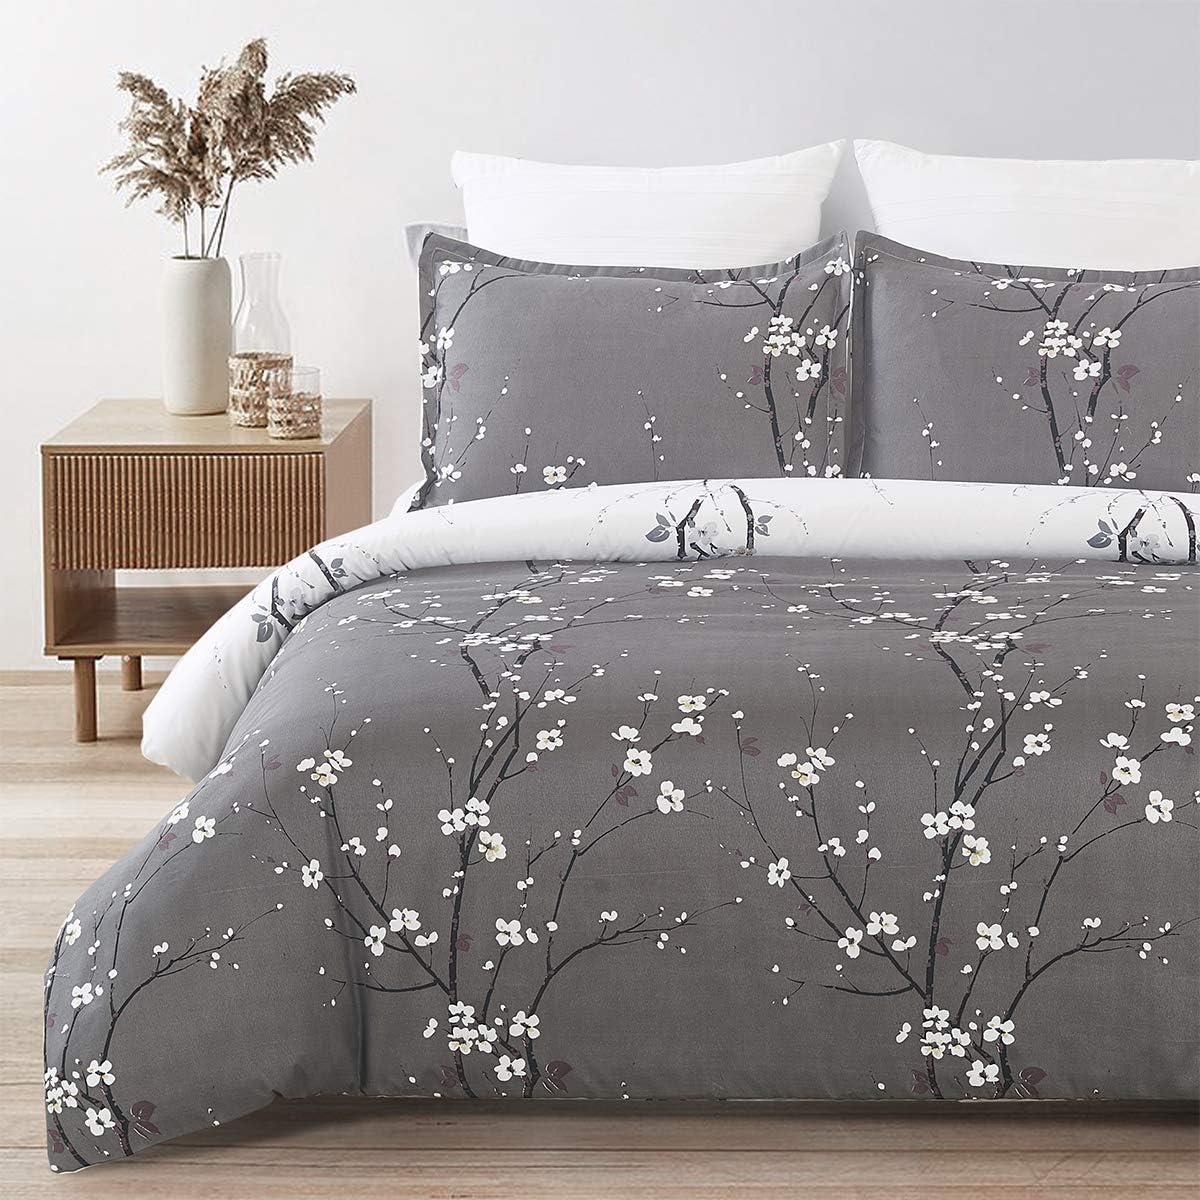 Soft Brushed Microfiber Duvet Cover Set with Zipper Closure and Corner Ties, Plum Blossom/Branch Floral Printed Pattern, Grey and White Color, Reversible Design, King Size(104x90 Inches)